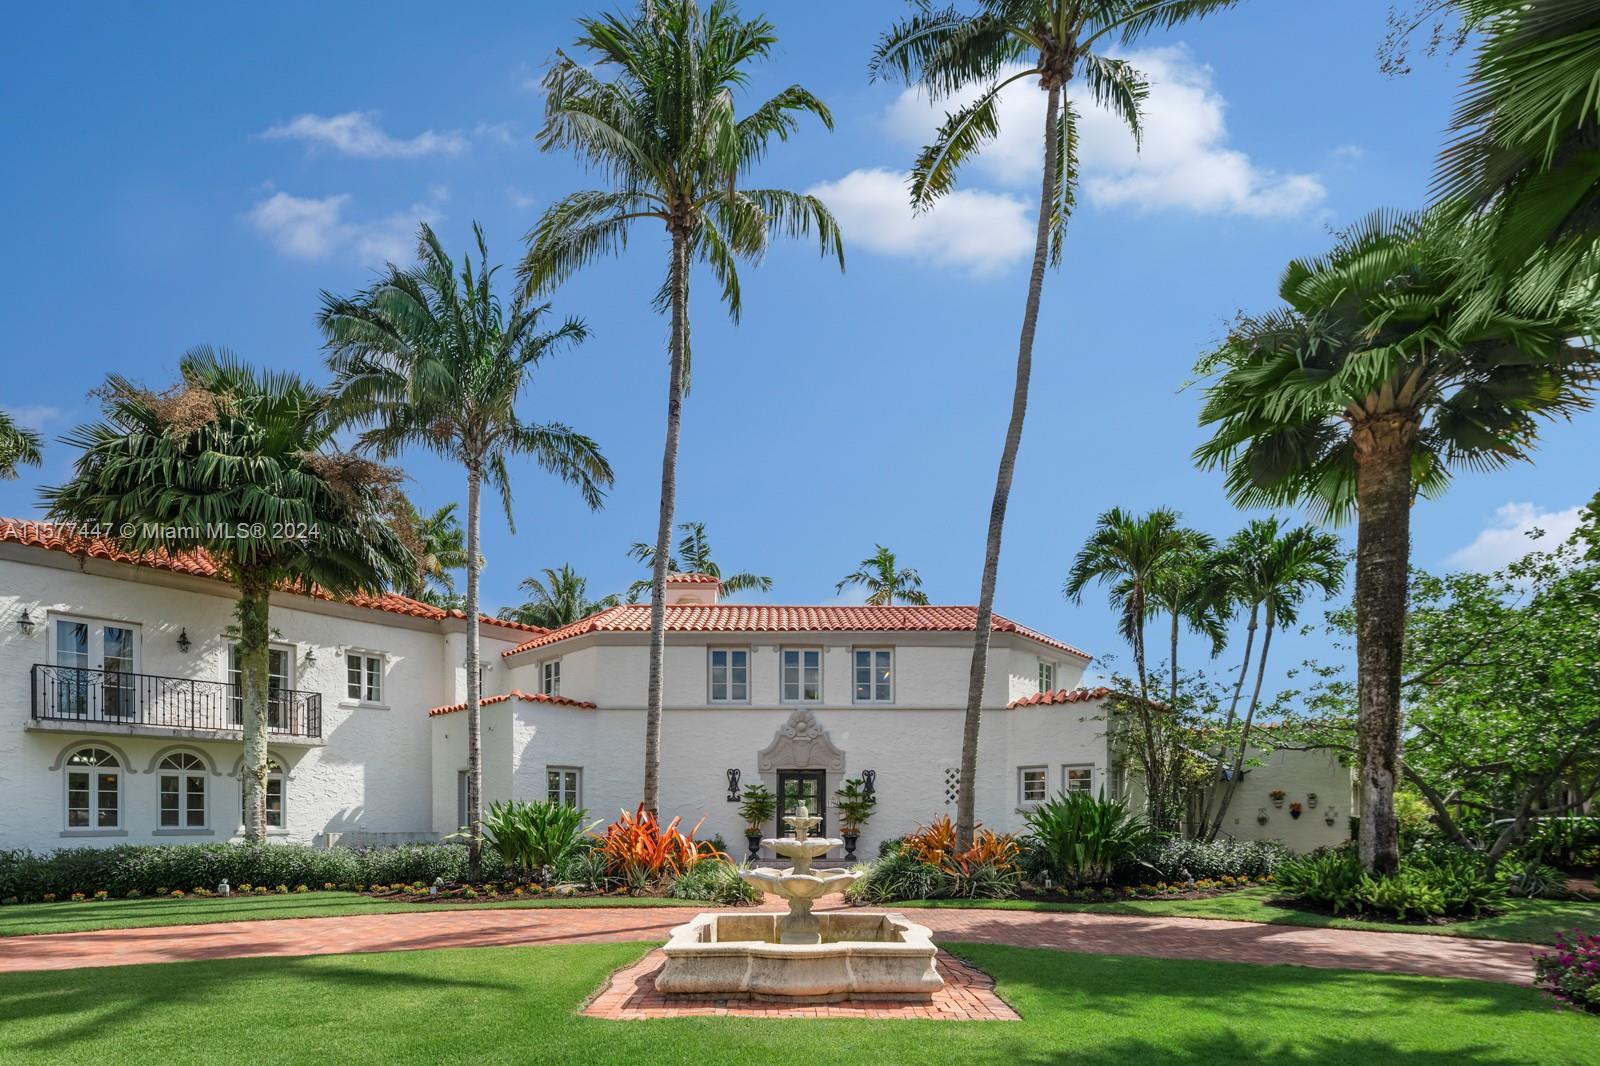 This elegant two-story 1924 Old Spanish is the epitome of quintessential living on one of Coral Gables' most prestigious street addresses. This architectural gem designed by Kiehnel & Elliot exemplifies the pinnacle of Mediterranean Revival Artistry. Situated on a 20,645 SF lot right in front of the iconic Biltmore Hotel, the tropical lush landscaping offers immense privacy & a serene atmosphere. The grand foyer overlooks the award-winning pool. 1st floor features 2 bedrooms, 2 full baths, renovated eat-in kitchen with Quartzite countertops, formal dining, living room & media room. 2nd floor features 5 bedrooms + den, 4 bathrooms & large primary suite and bath with built-in sauna, & covered balcony. Home has newer electrical, plumbing, new roof, impact windows/doors throughout.